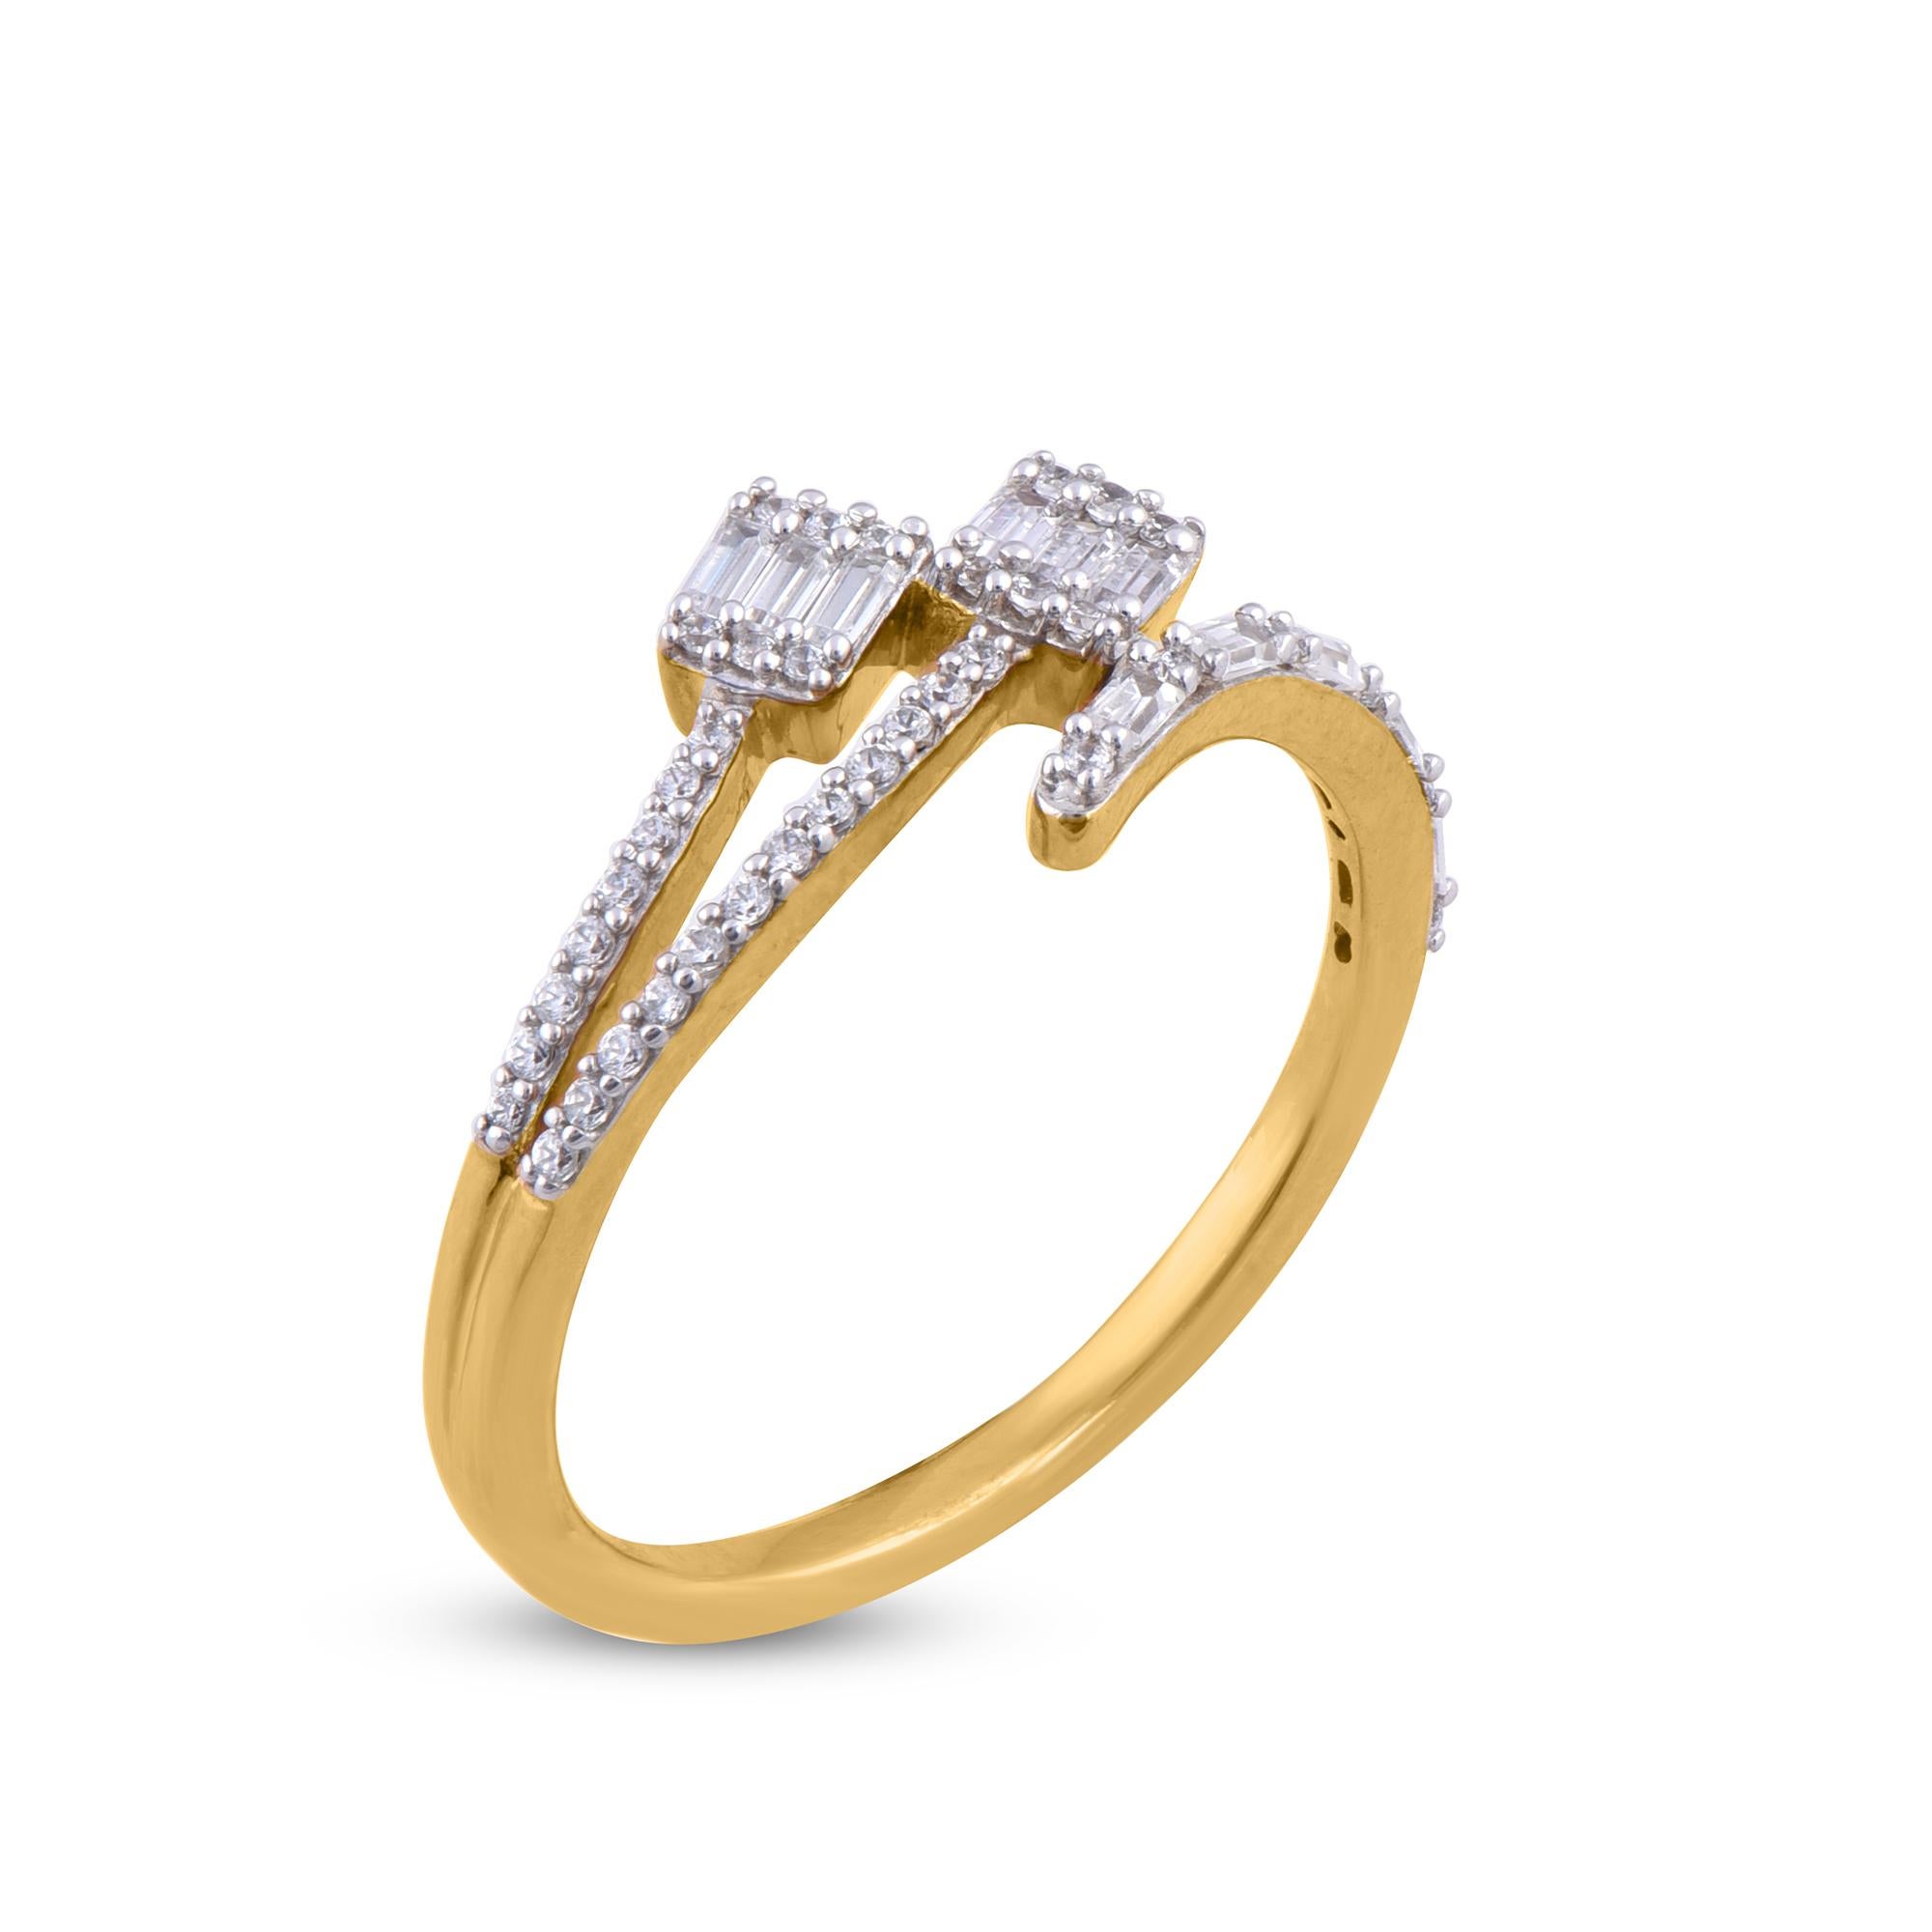 Bring charm to your look with this diamond ring. The ring is crafted from 14-karat gold in your choice of white, rose, or yellow, and features Round Brilliant 38 and Baguette - 11 white diamonds, Prong set, H-I color I2 clarity and a high polish